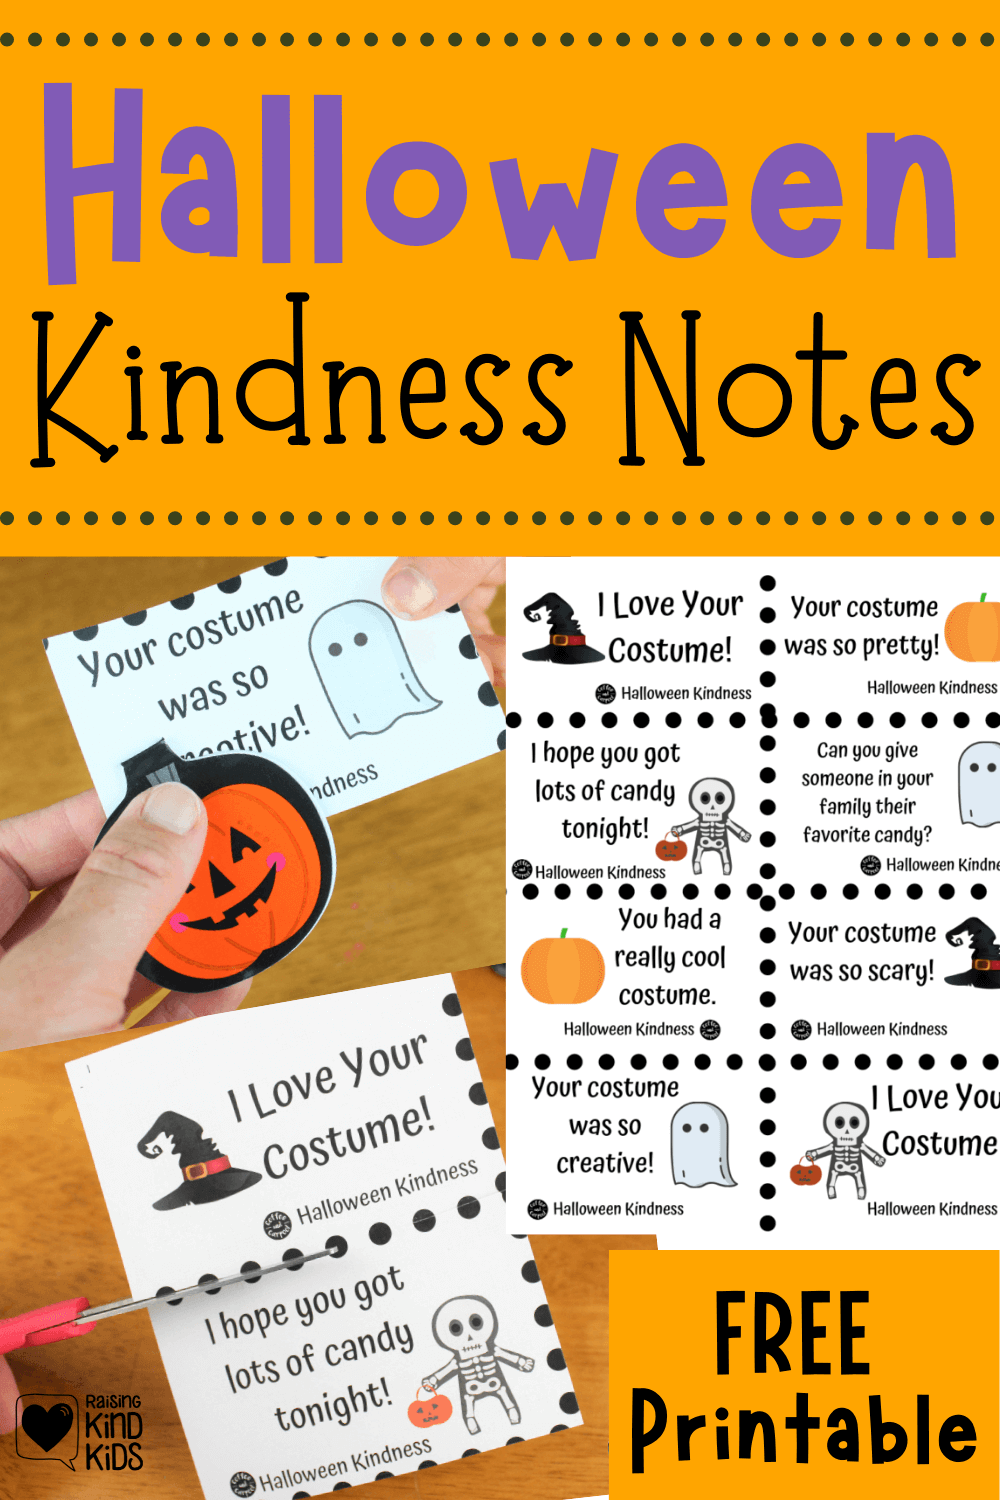 Halloween Kindness Notes to spread kindness this Halloween to trick or treaters. It's the perfect kindness activity for kids #kindness #kindnessactivities #kindkids #kindness #halloween #halloweenactivities